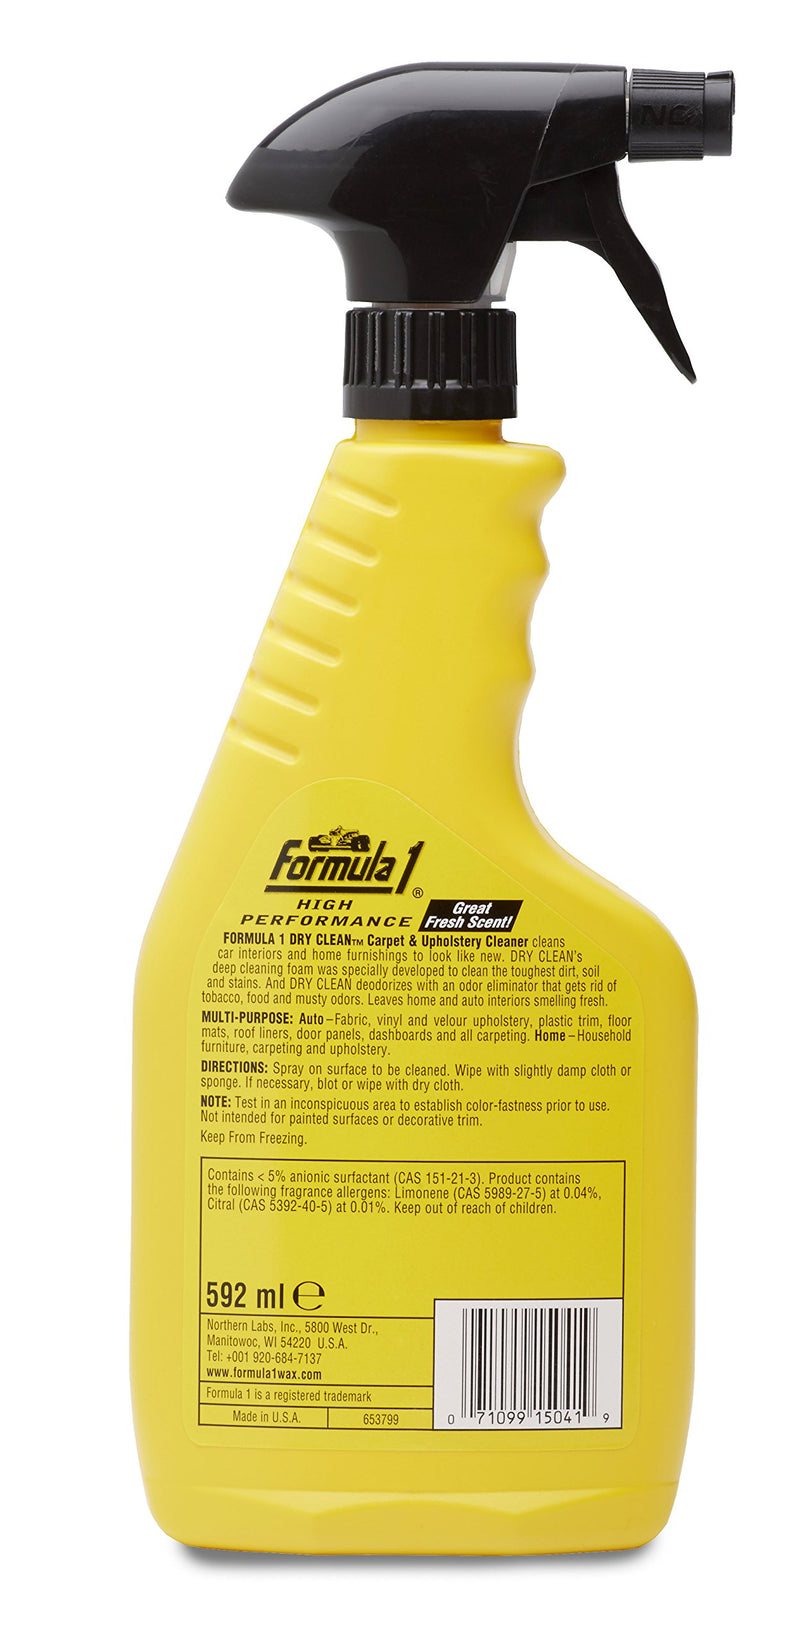  [AUSTRALIA] - Northern Labs Formula 1 Dry Clean Carpet and Upholstery Cleaner – For Car and Home Use – 20 fl. oz.